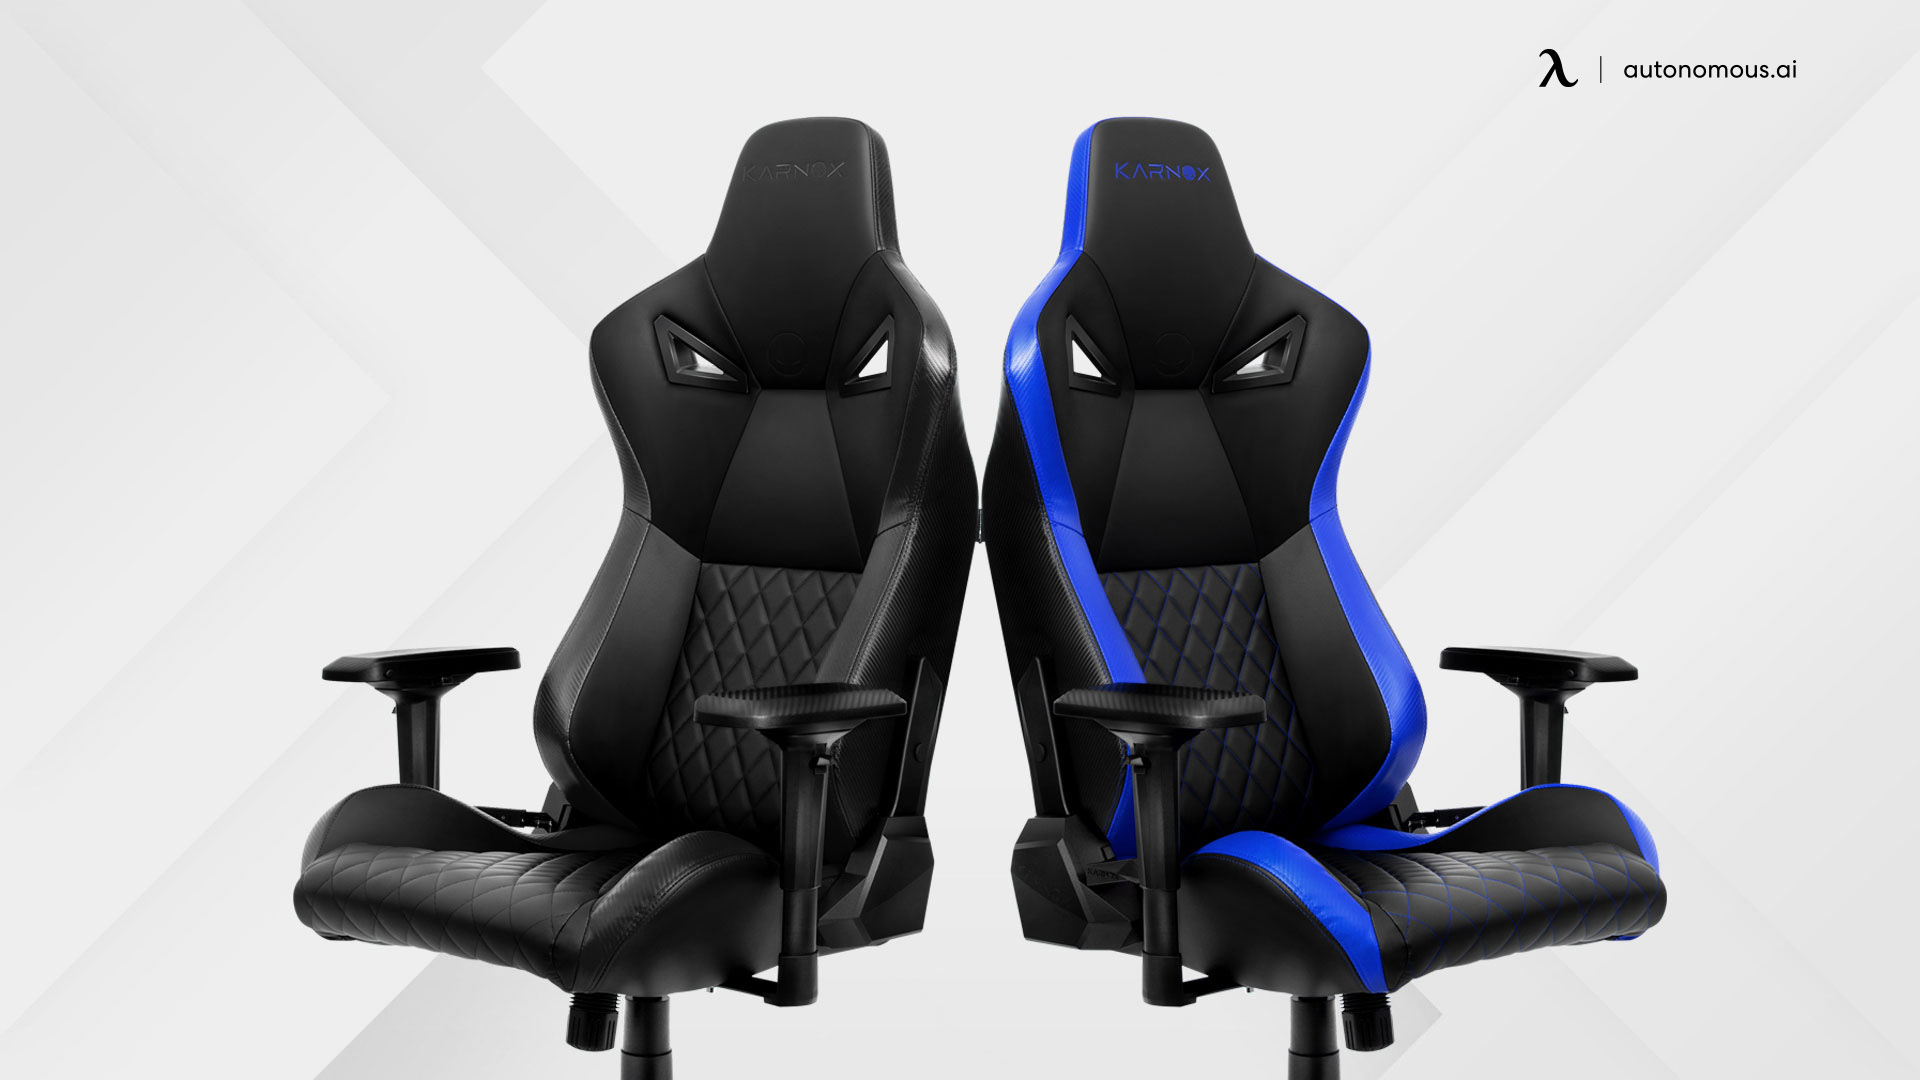 Gaming Chair Special Edition by Vertagear